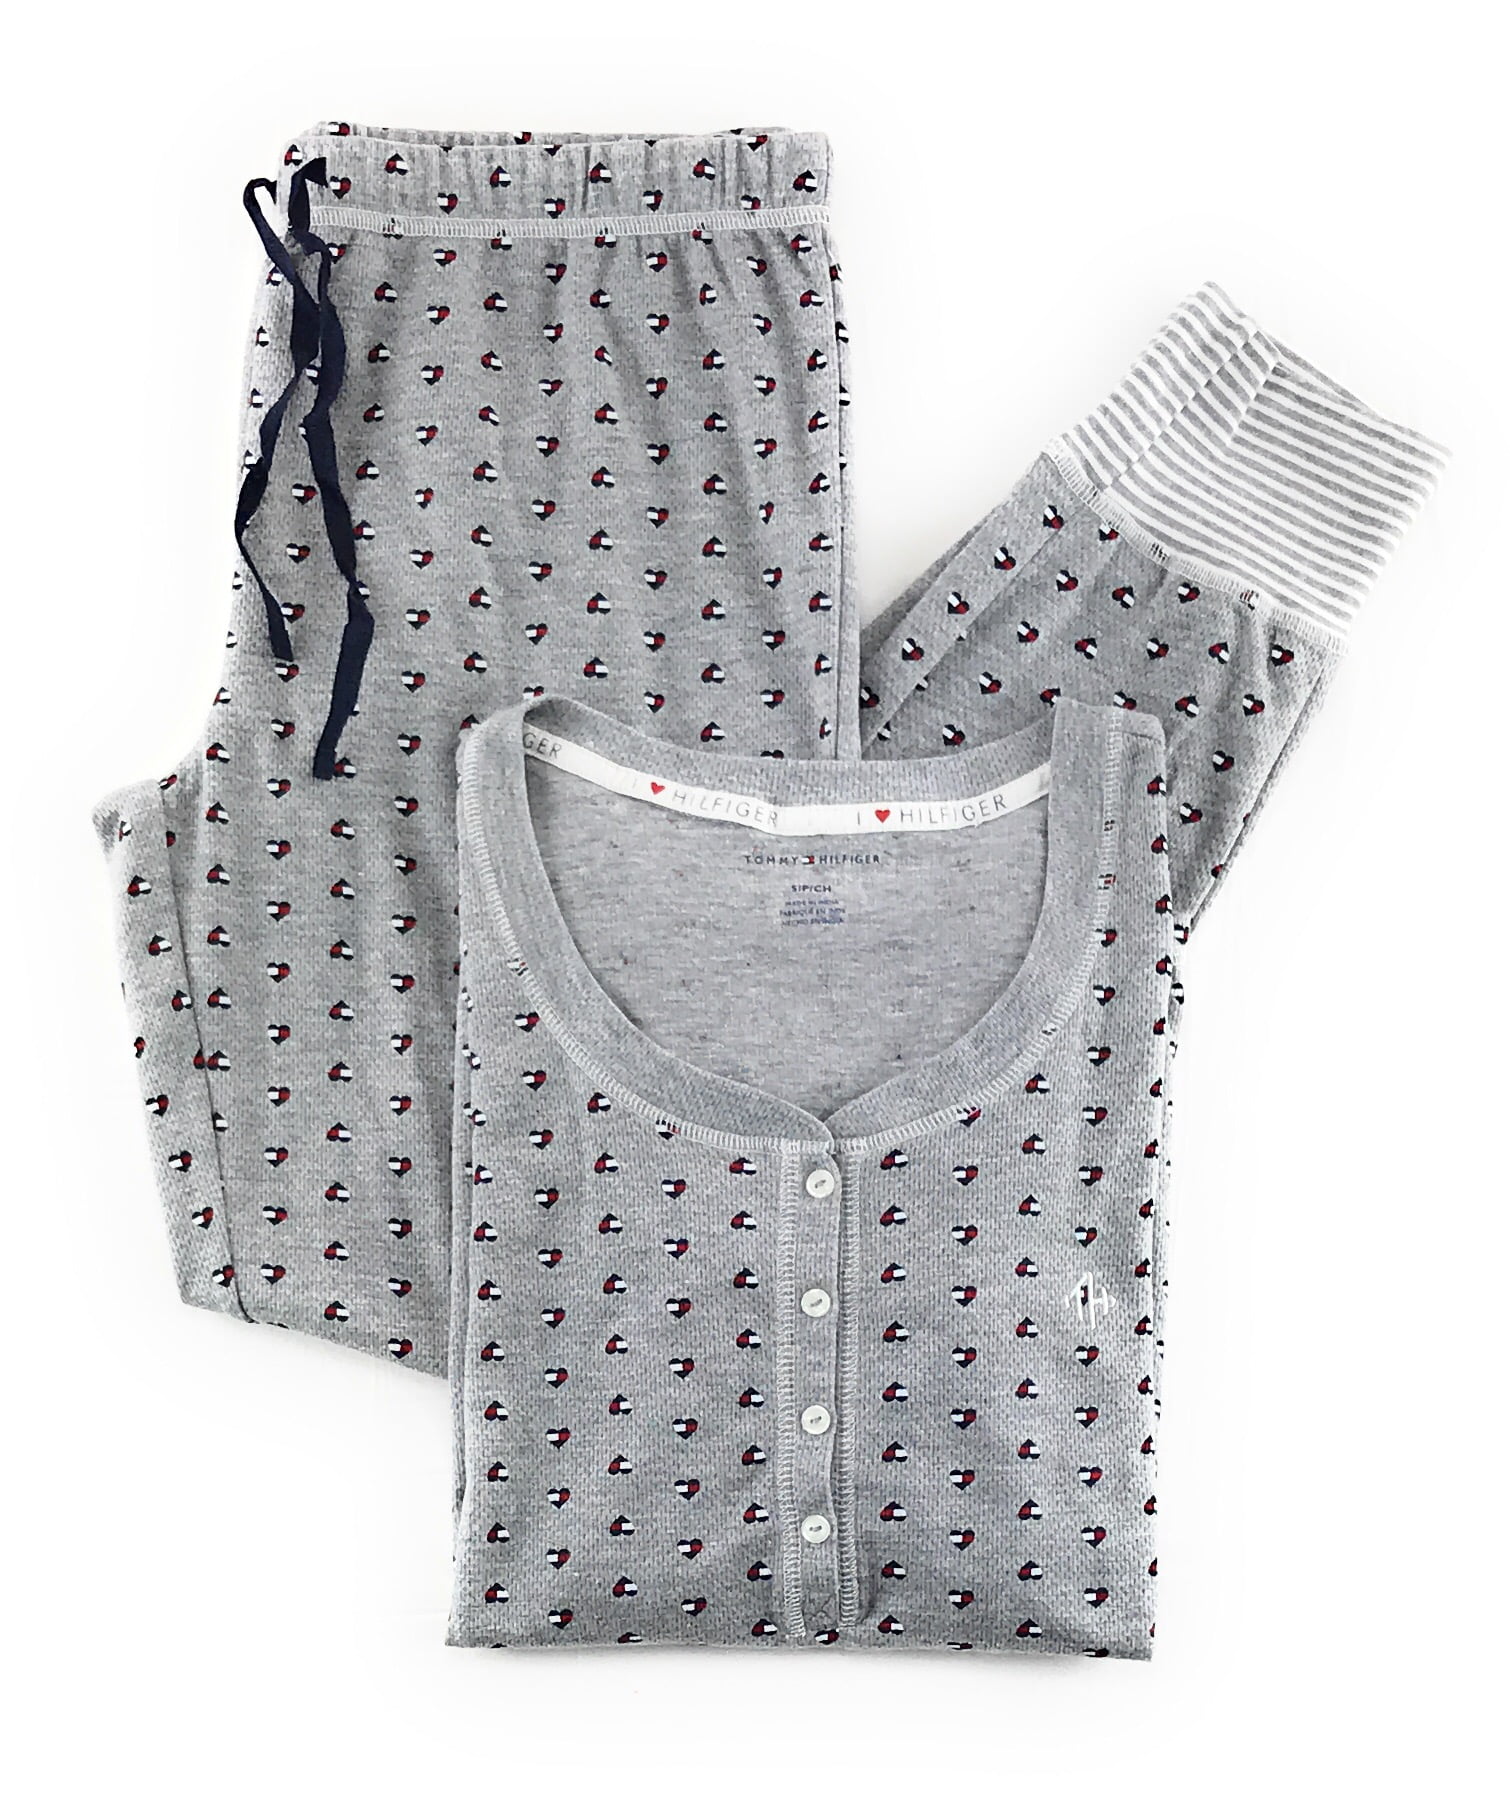 Tommy Hilfiger Women's Pajama Set Henley Long Sleeve Thermal Gray Heart Flags 